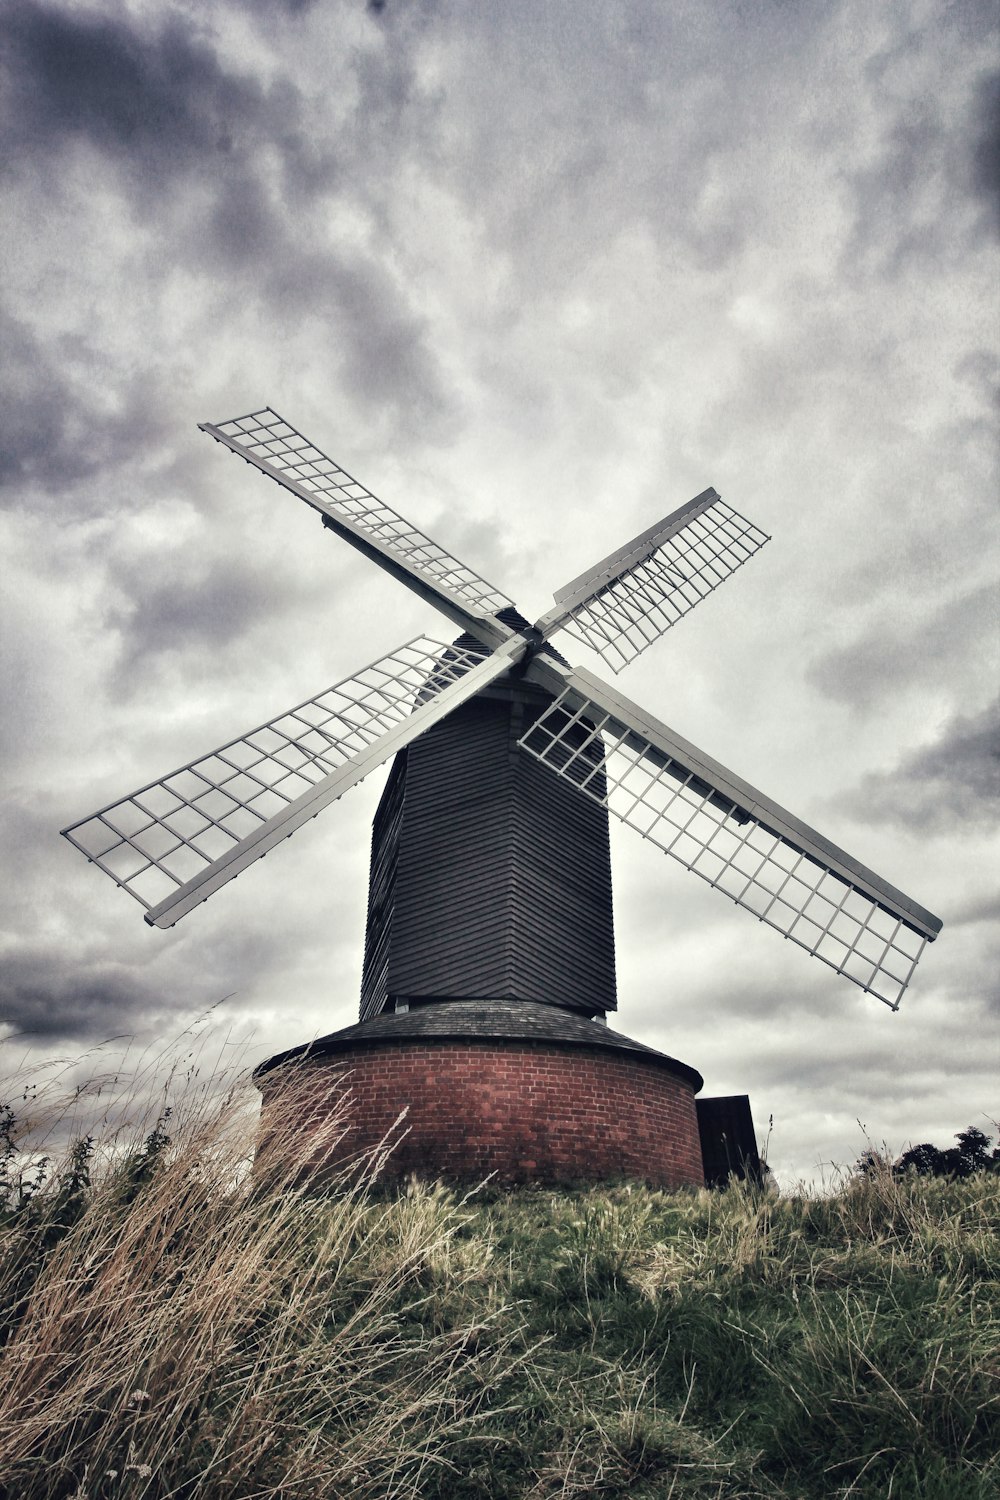 brown and gray windmill under cloudy sky during daytime